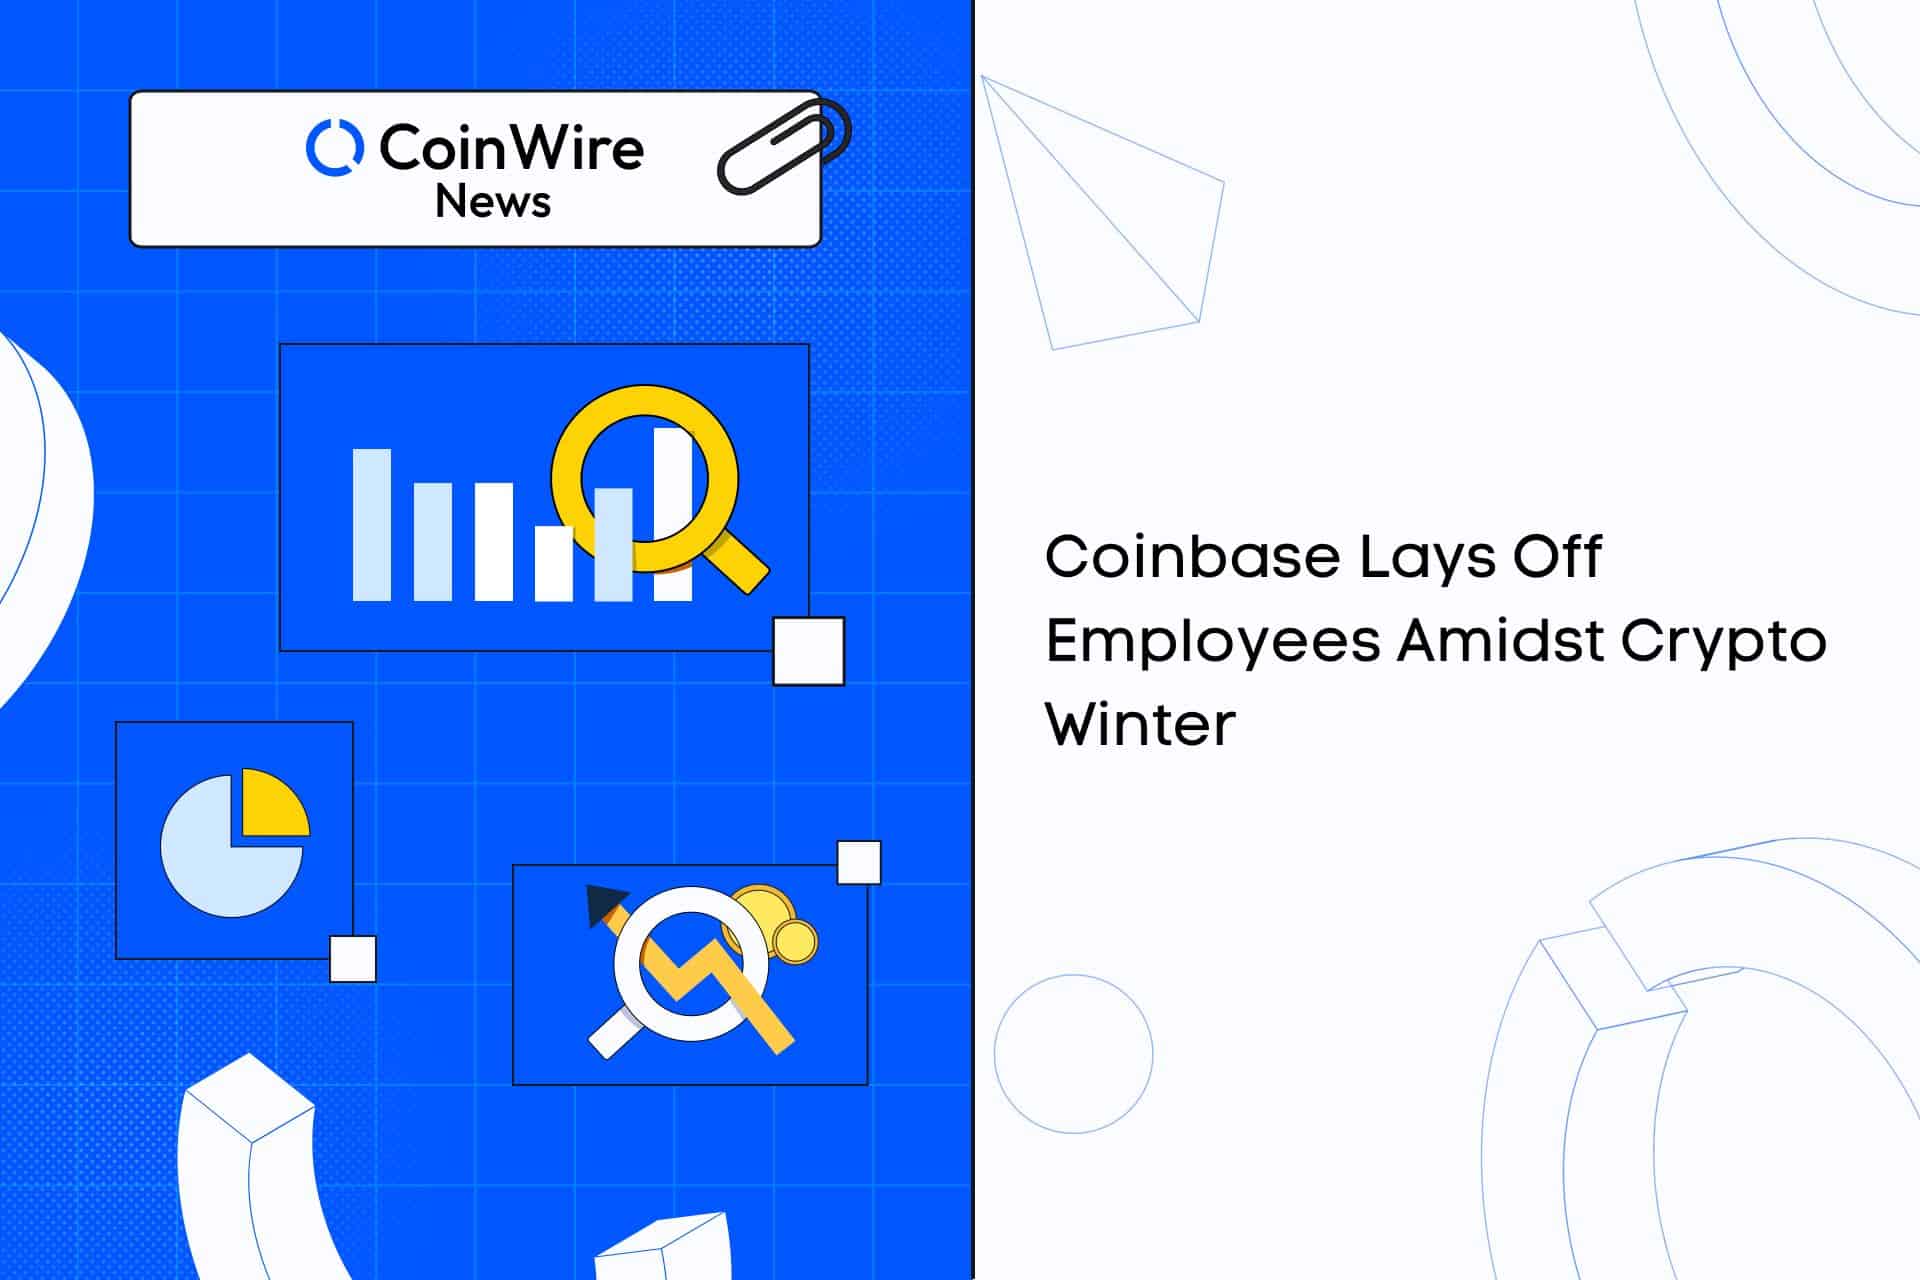 Coinbase Follows Twitter And Meta In Laying Off Employees Amidst Crypto Winter